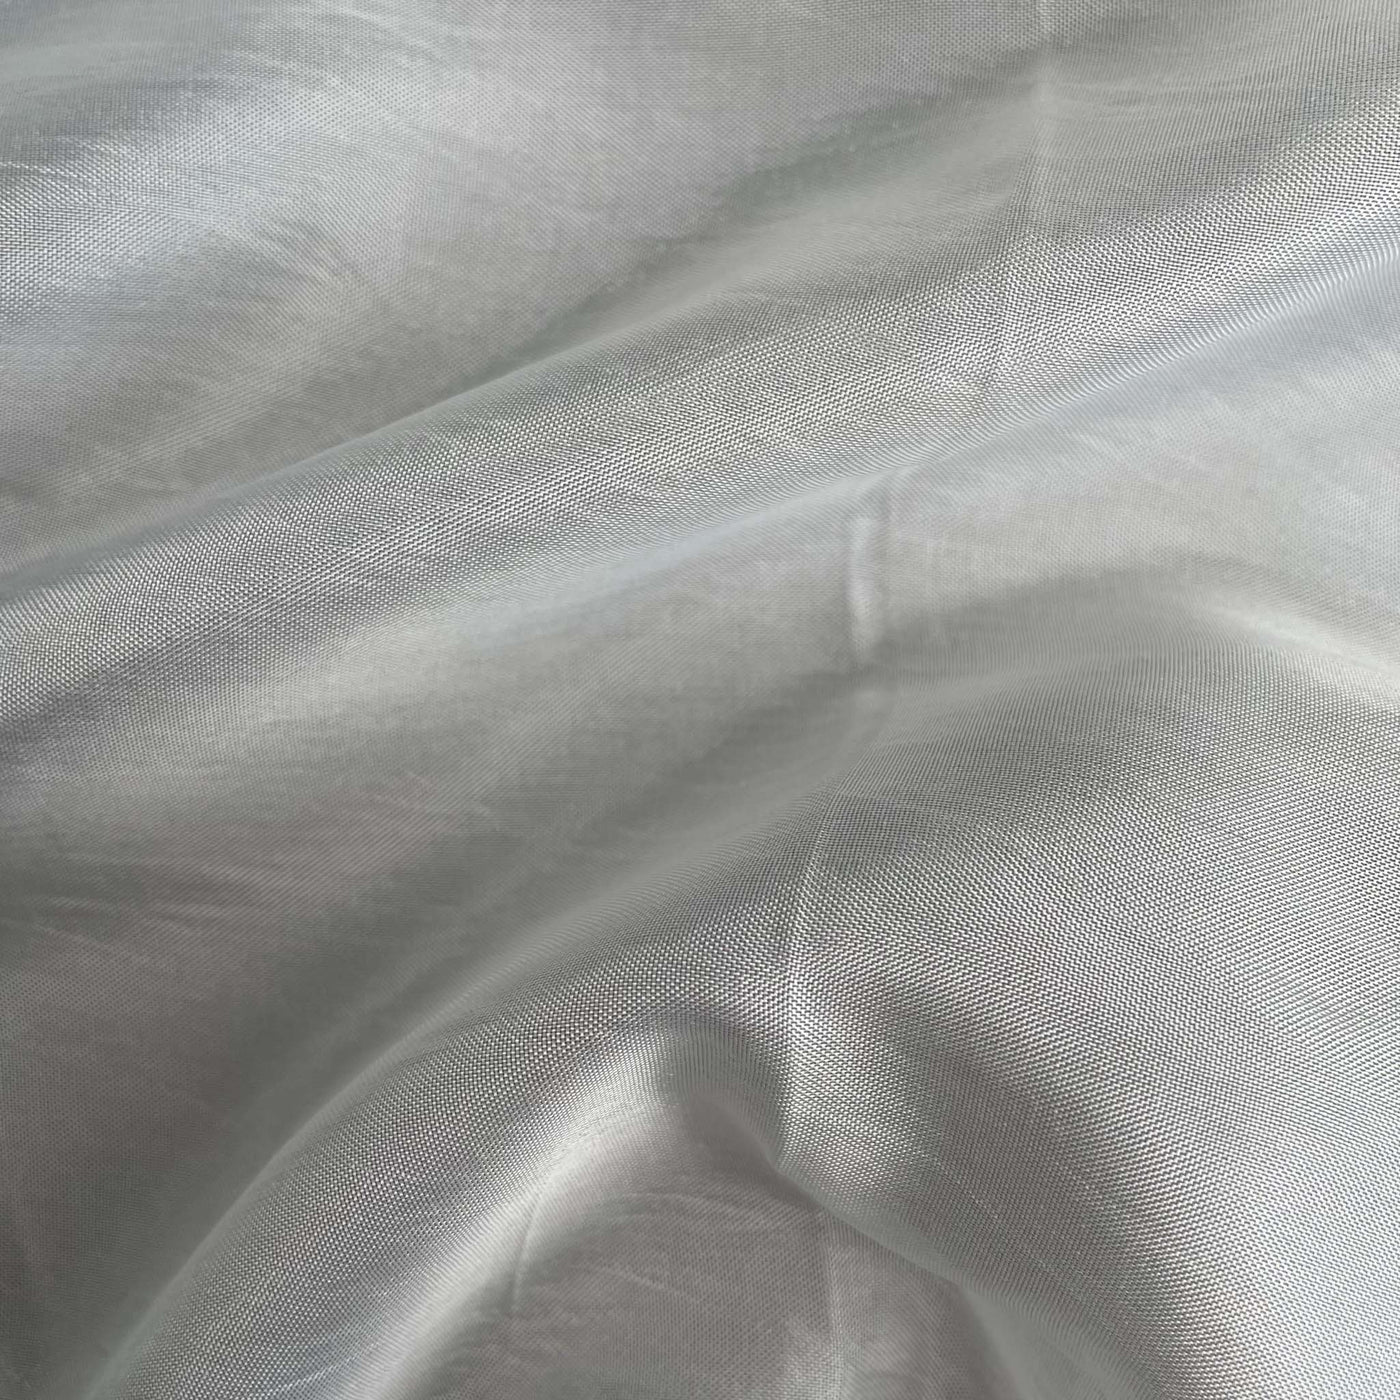 Dyeable Fabric Cut Piece (CUT PIECE) White Dyeable Pure Bemberg Habutai Plain Fabric (Width 42 Inches)